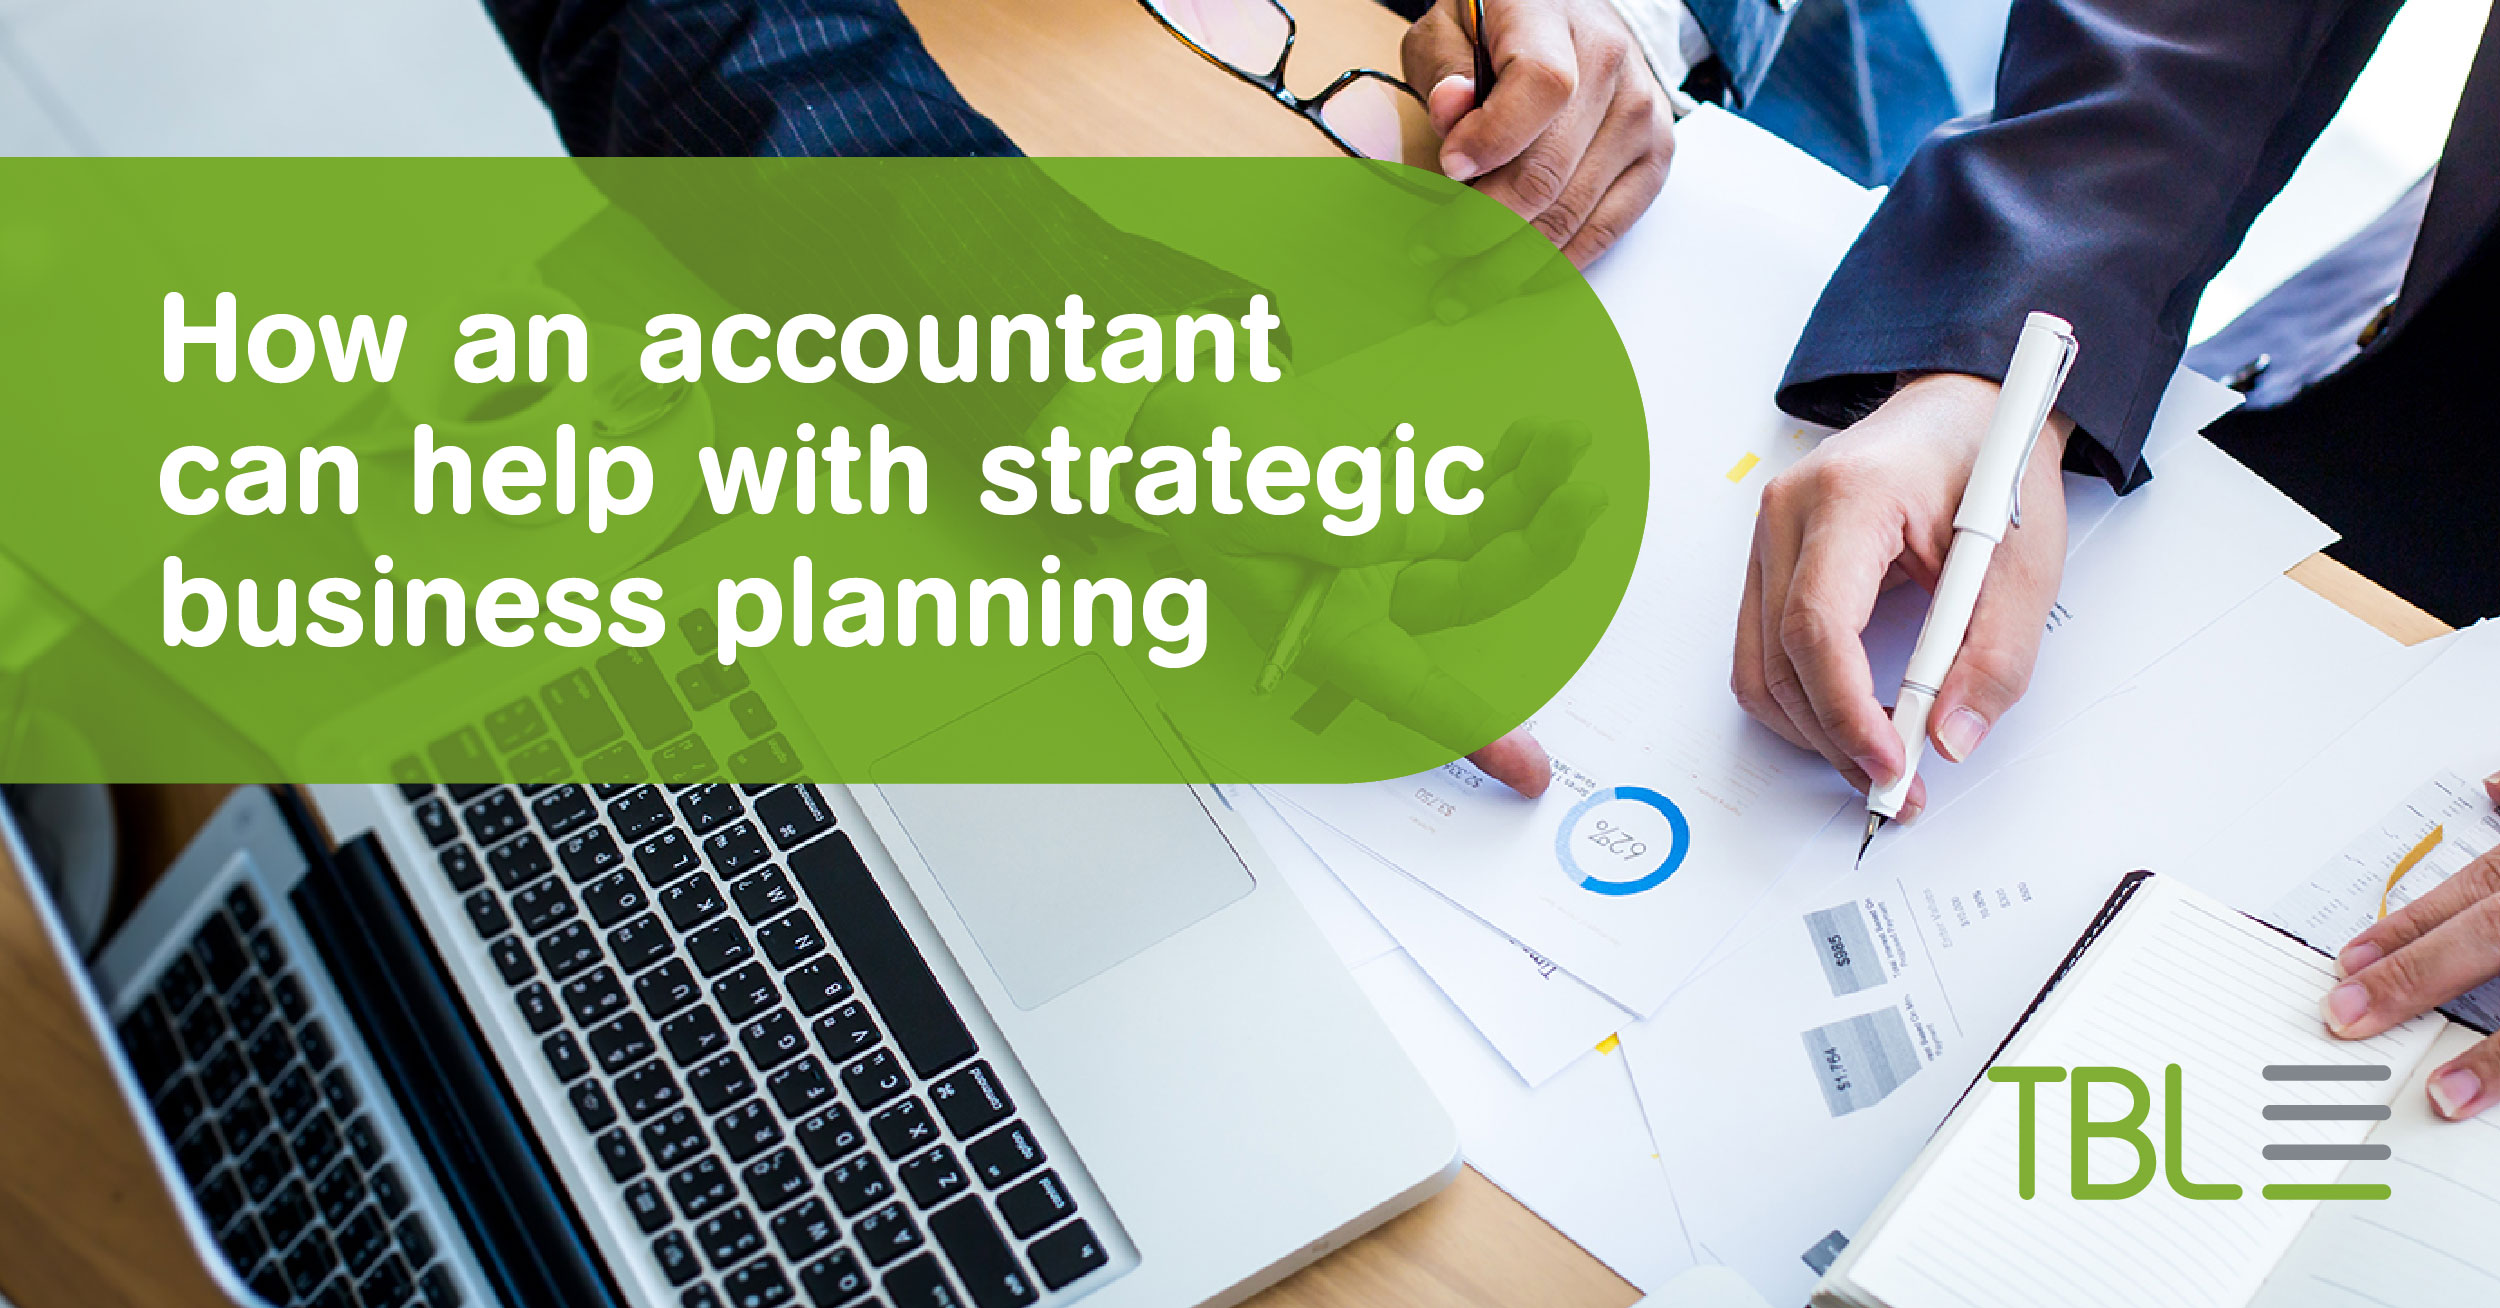 TBL how an accountant can help with business planning